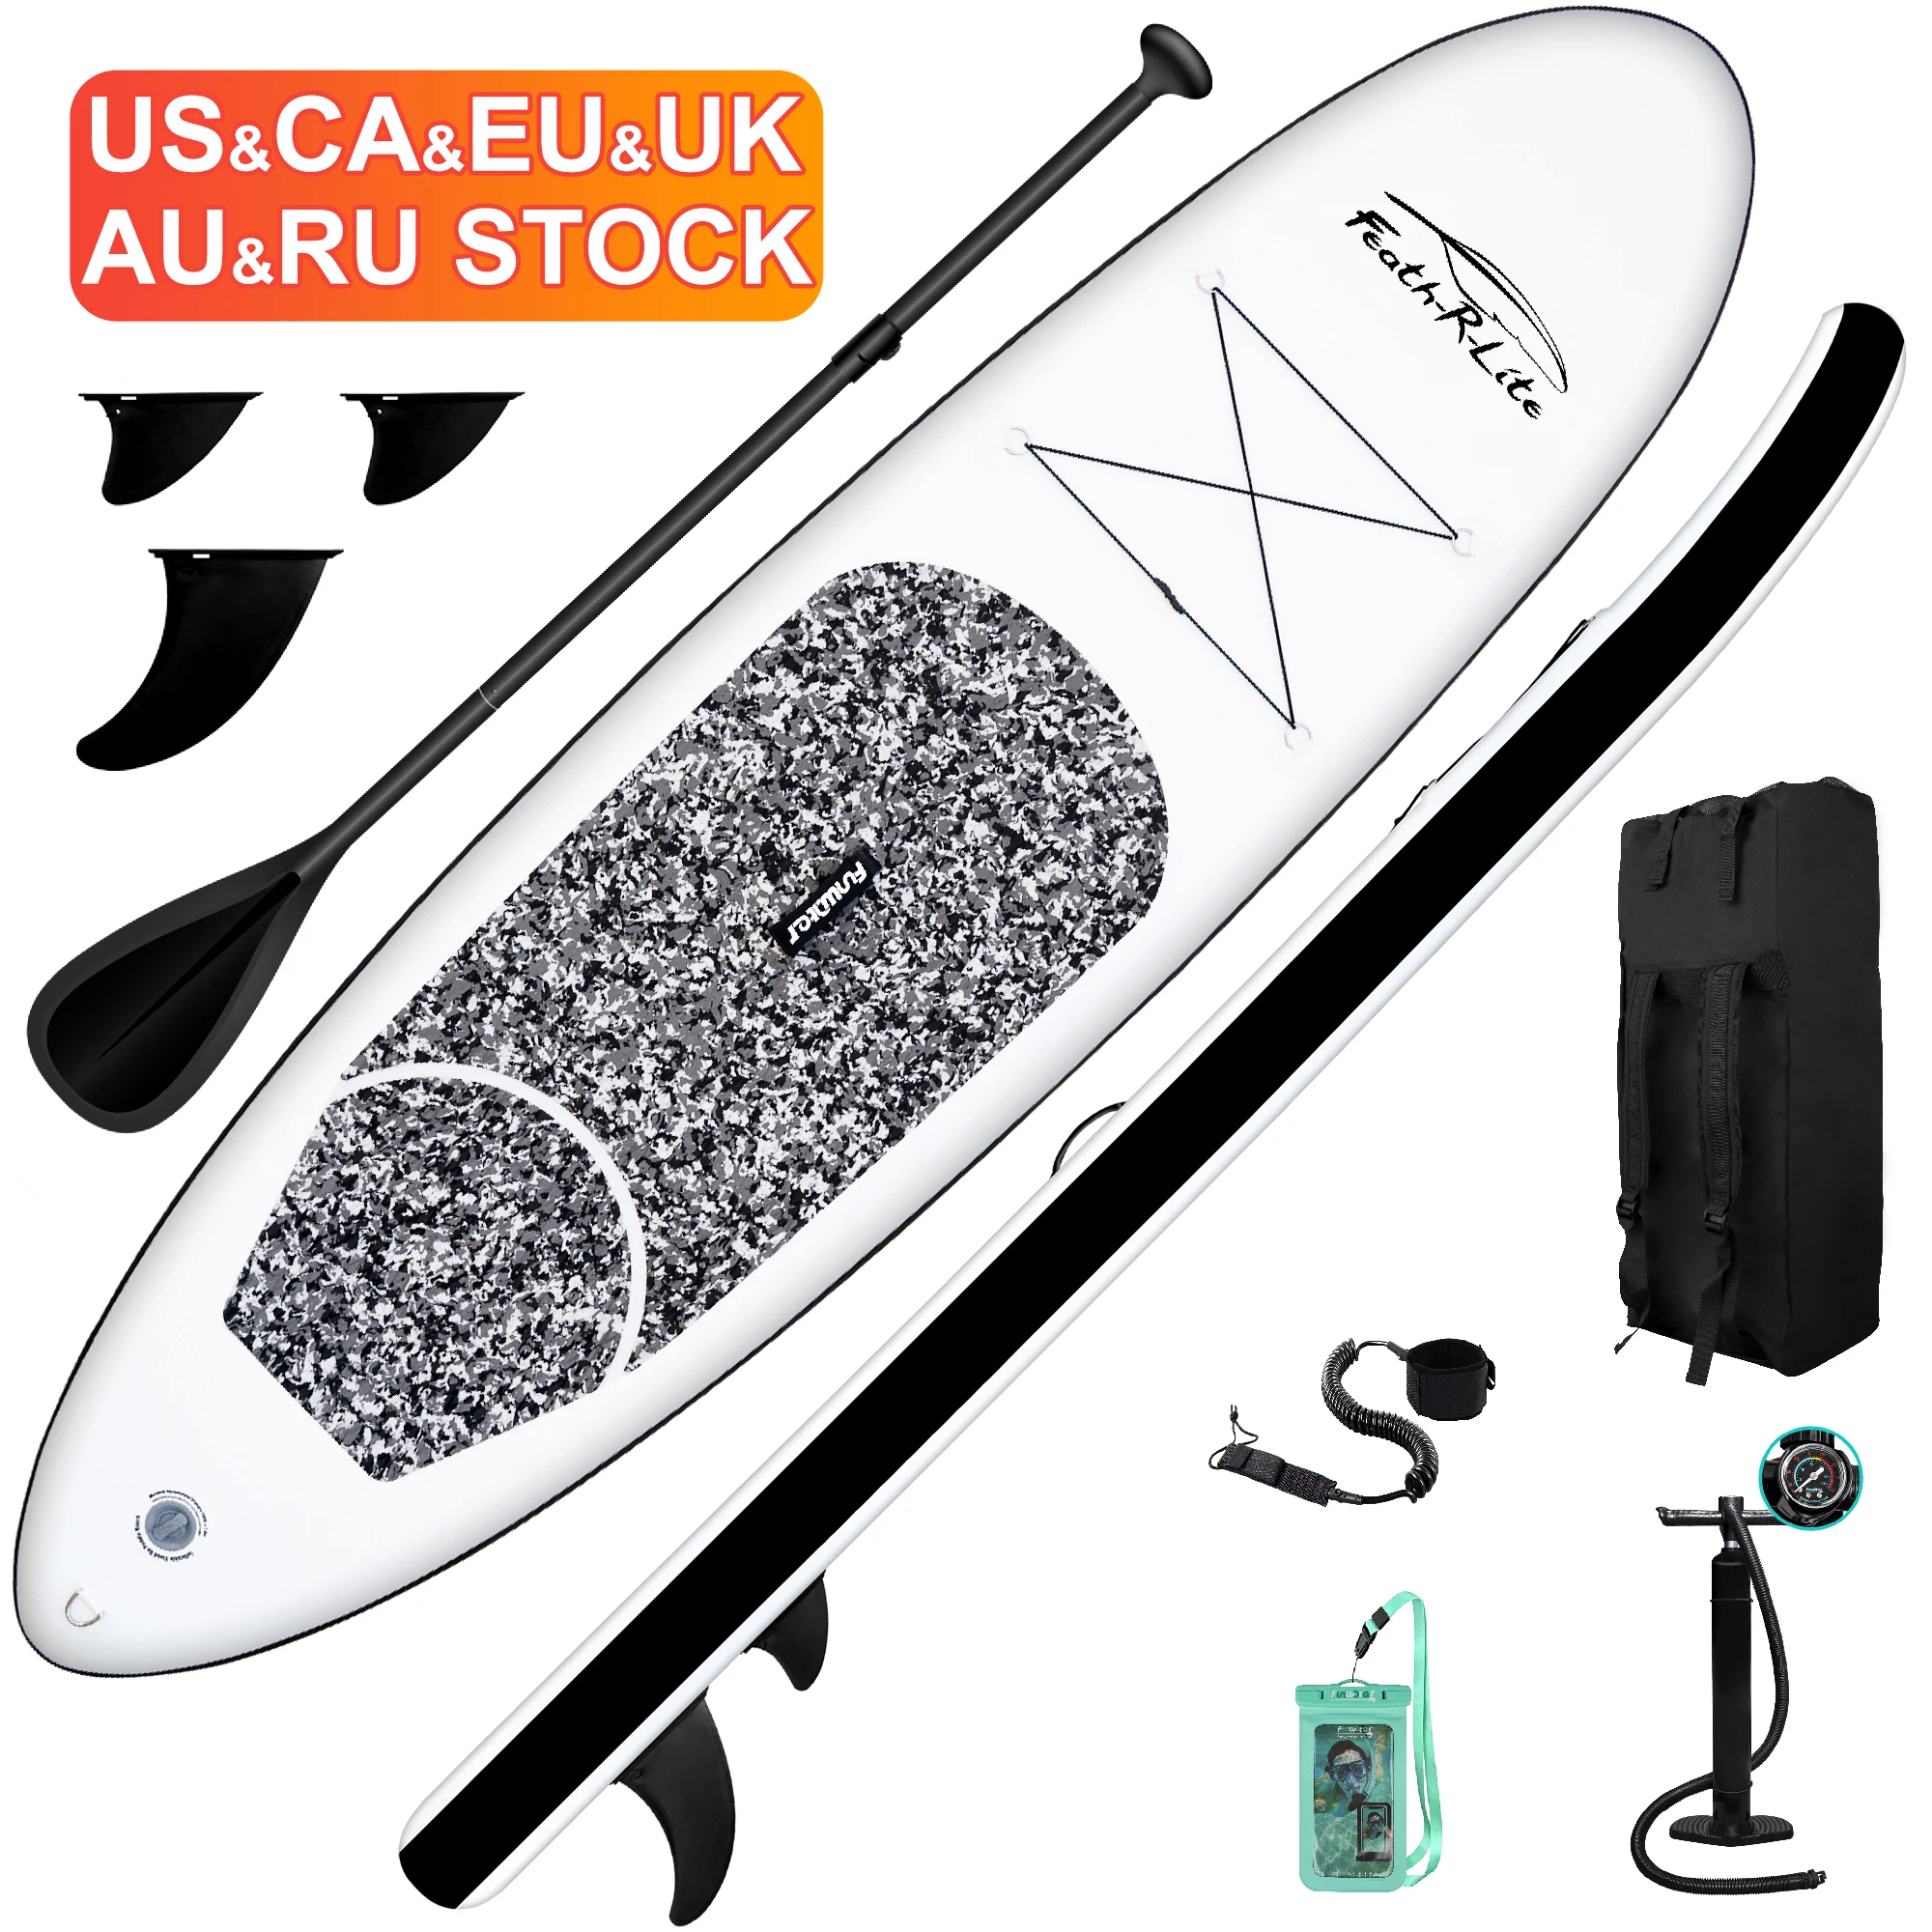 

FUNWATER Dropshipping OEM Wholesale cheap black surf board CE surfboard sup paddle board inflatable paddle paddleboard sample